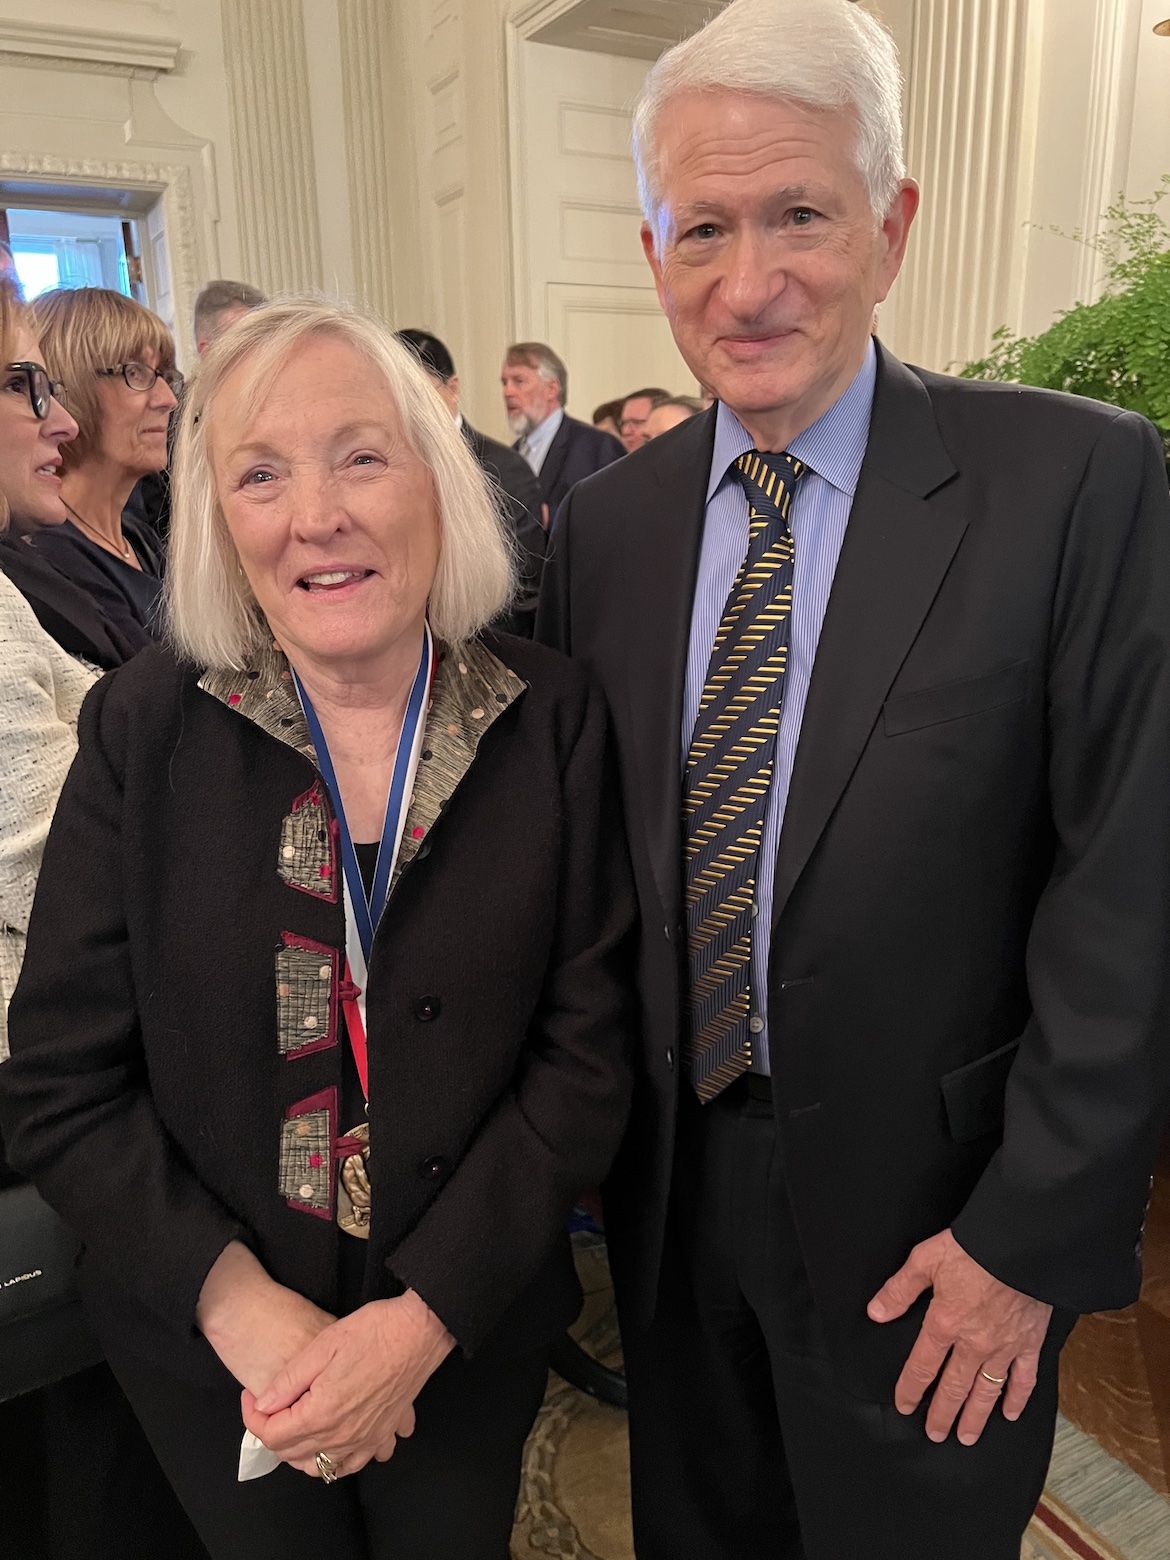 Shelley Taylor, white with a white/blonde bob haircut, wears a medal and smiles for the camera with UCLA Chancellor Gene Block, white with white hair, wearing a suit.